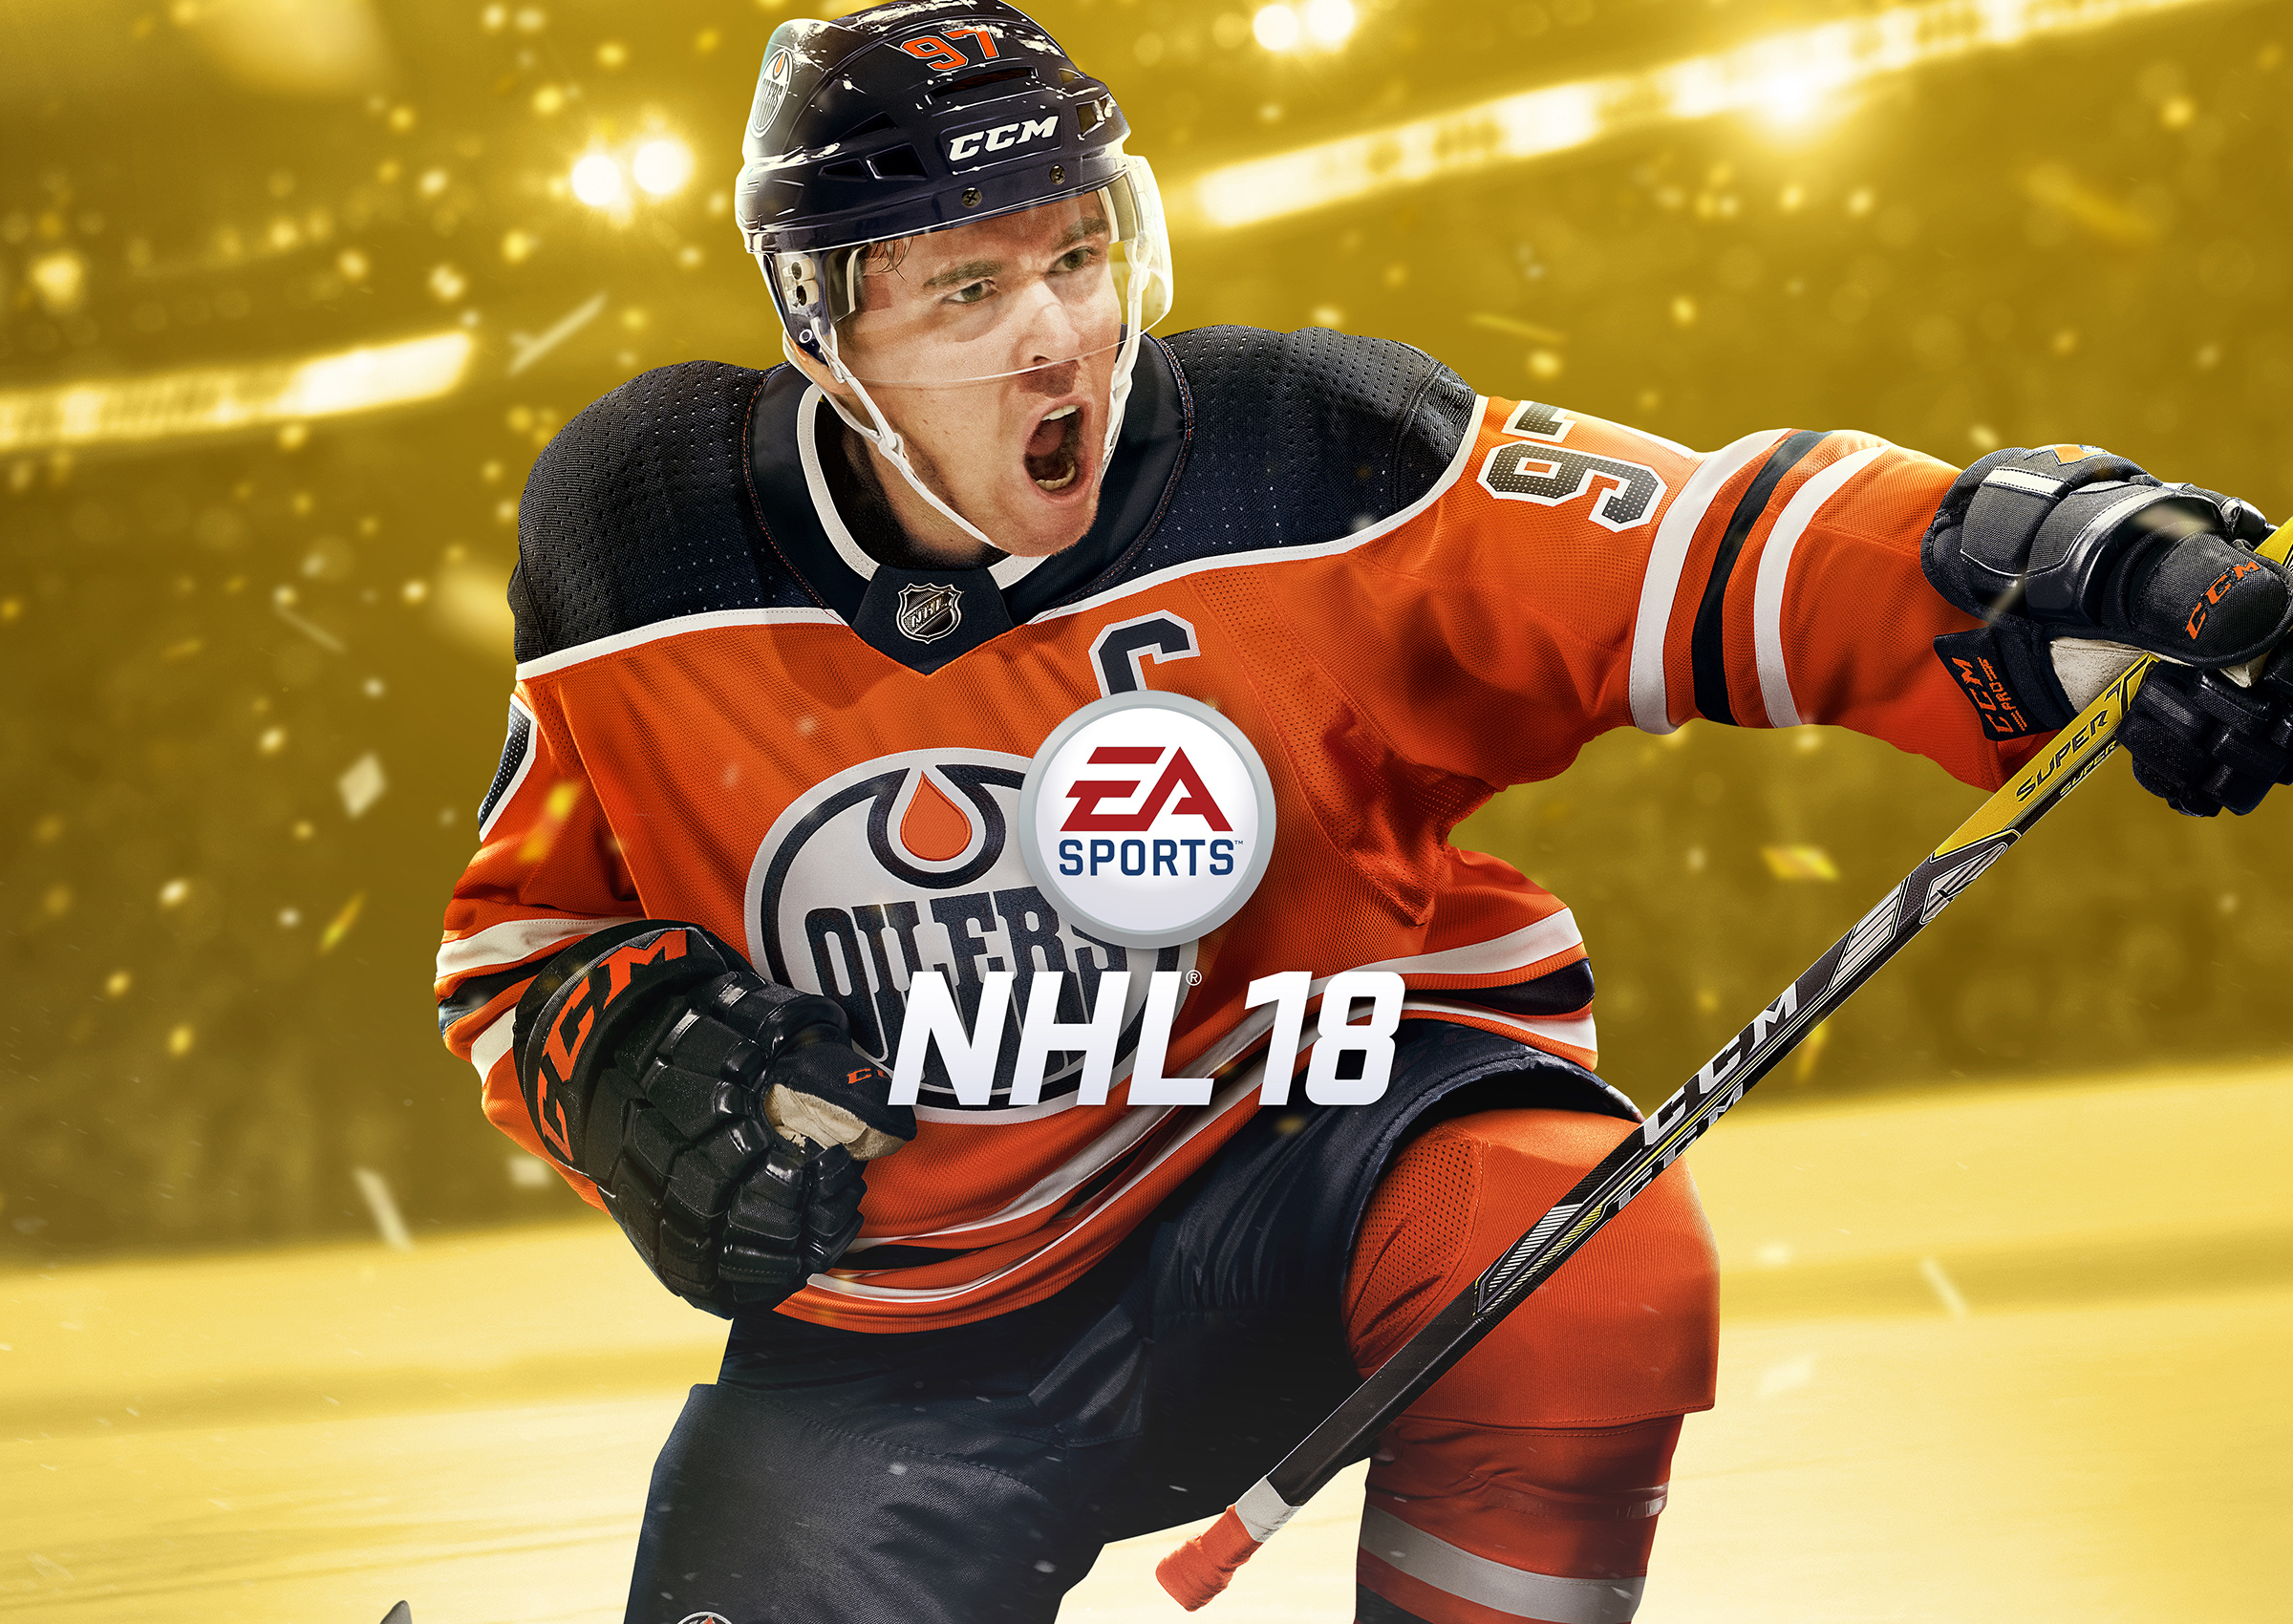 Free download Connor McDavid is the NHL 18 cover athlete Polygon